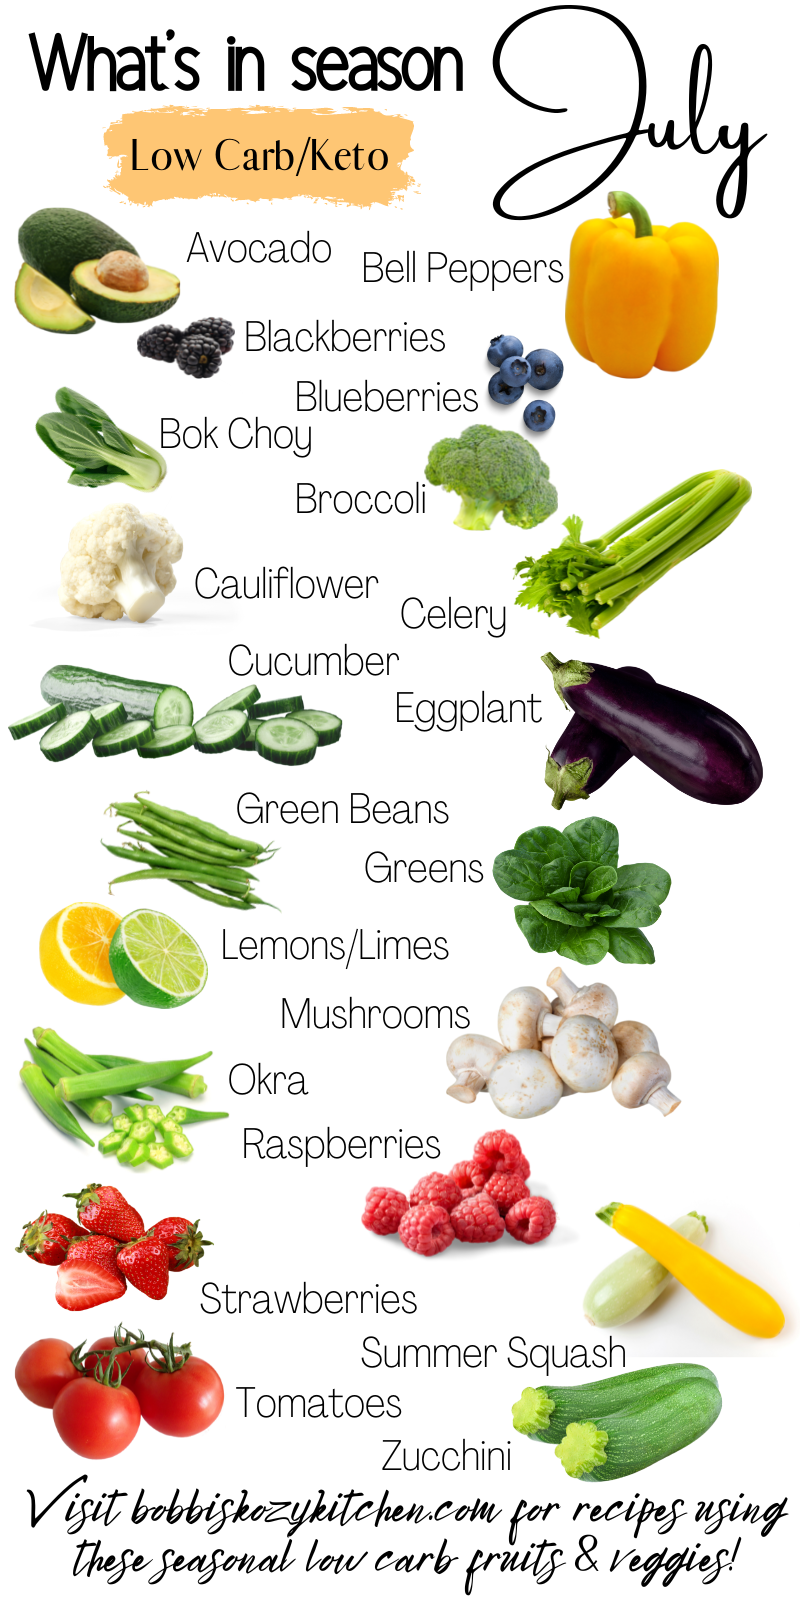 What’s in Season? Low Carb July Produce Guide